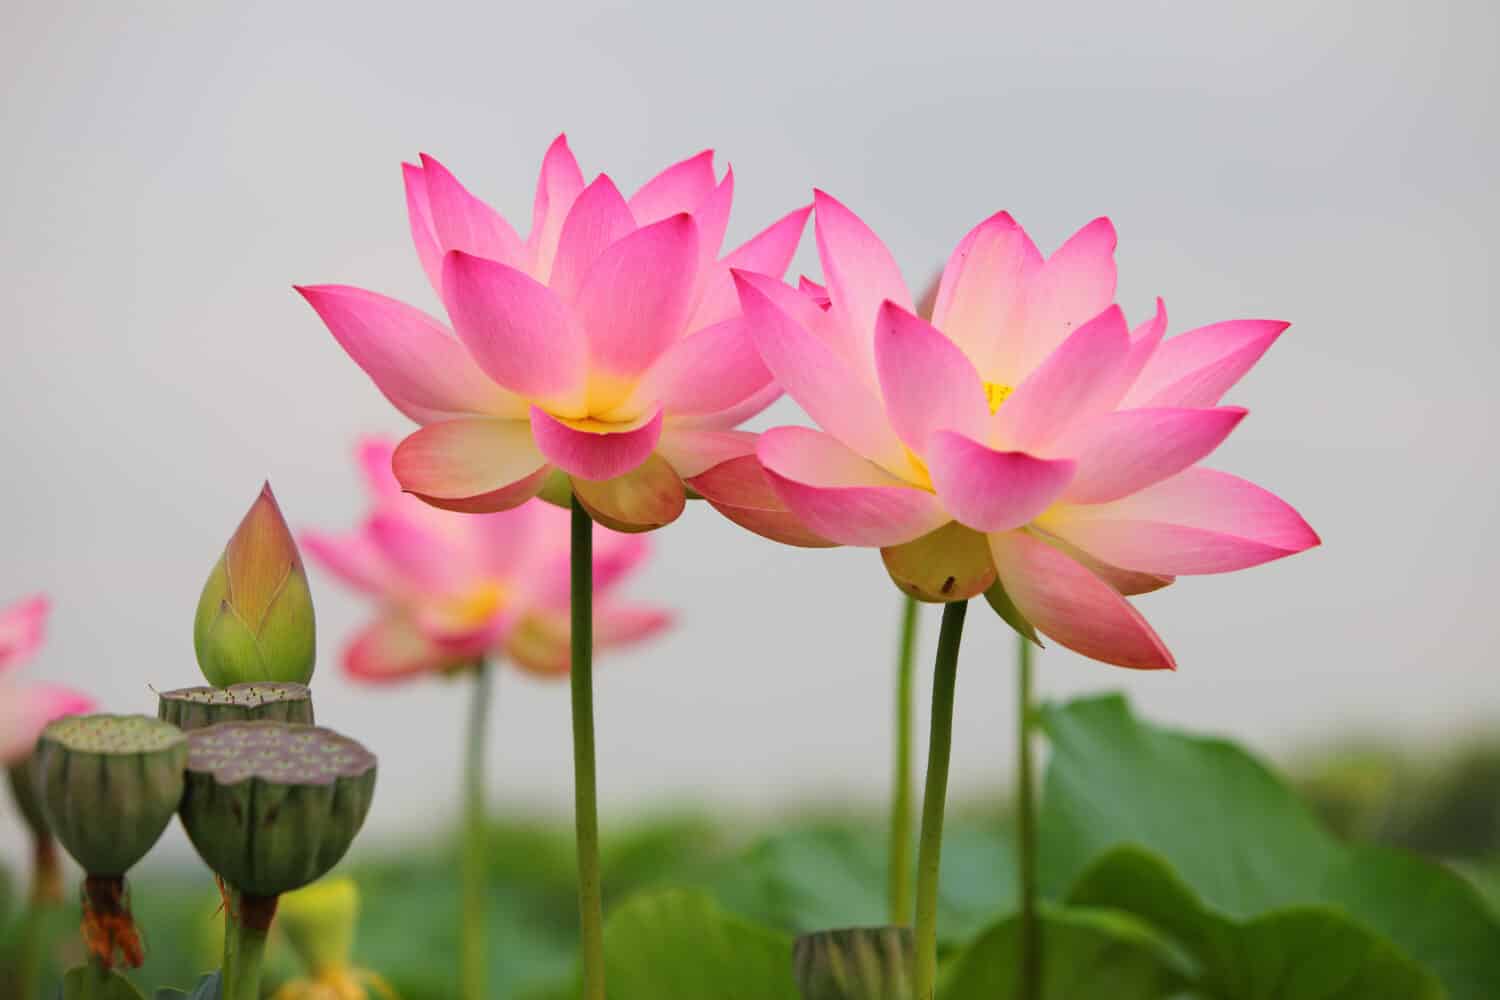 A Beautiful pink sacred lotus flower on white blurred sky background.